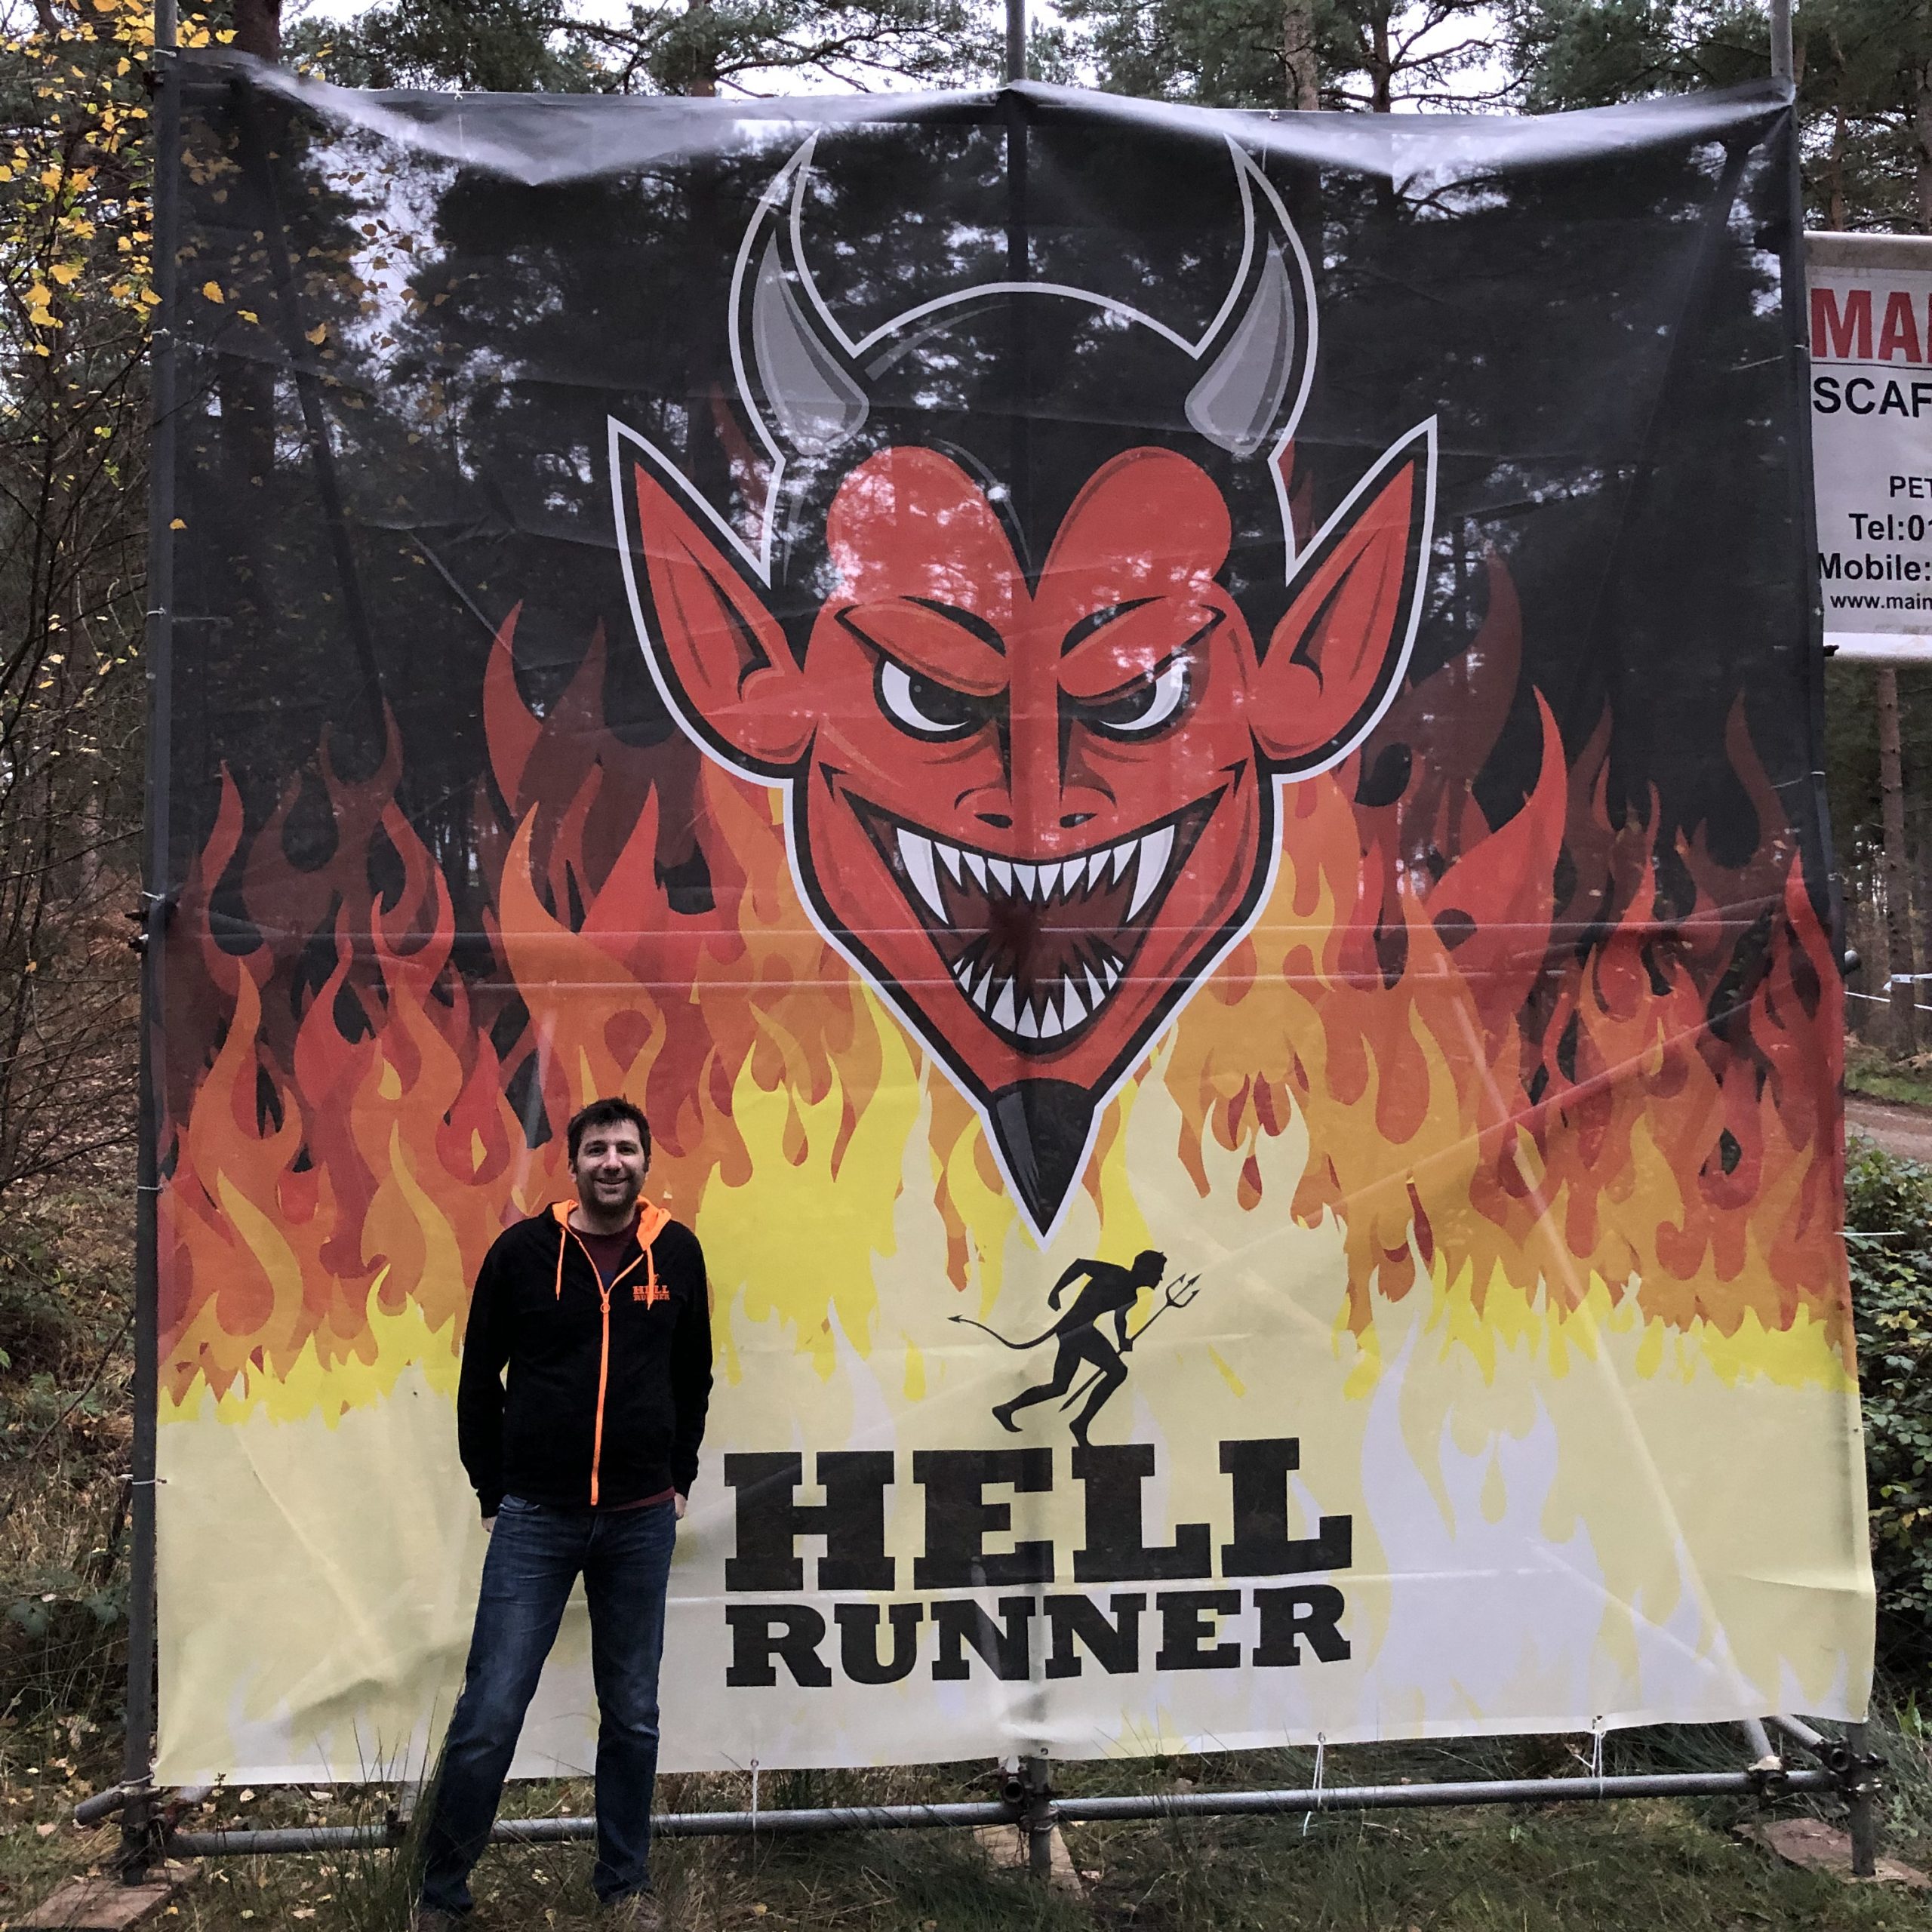 Chris at HellRunner event at Delamere Forest near Northwich Cheshire